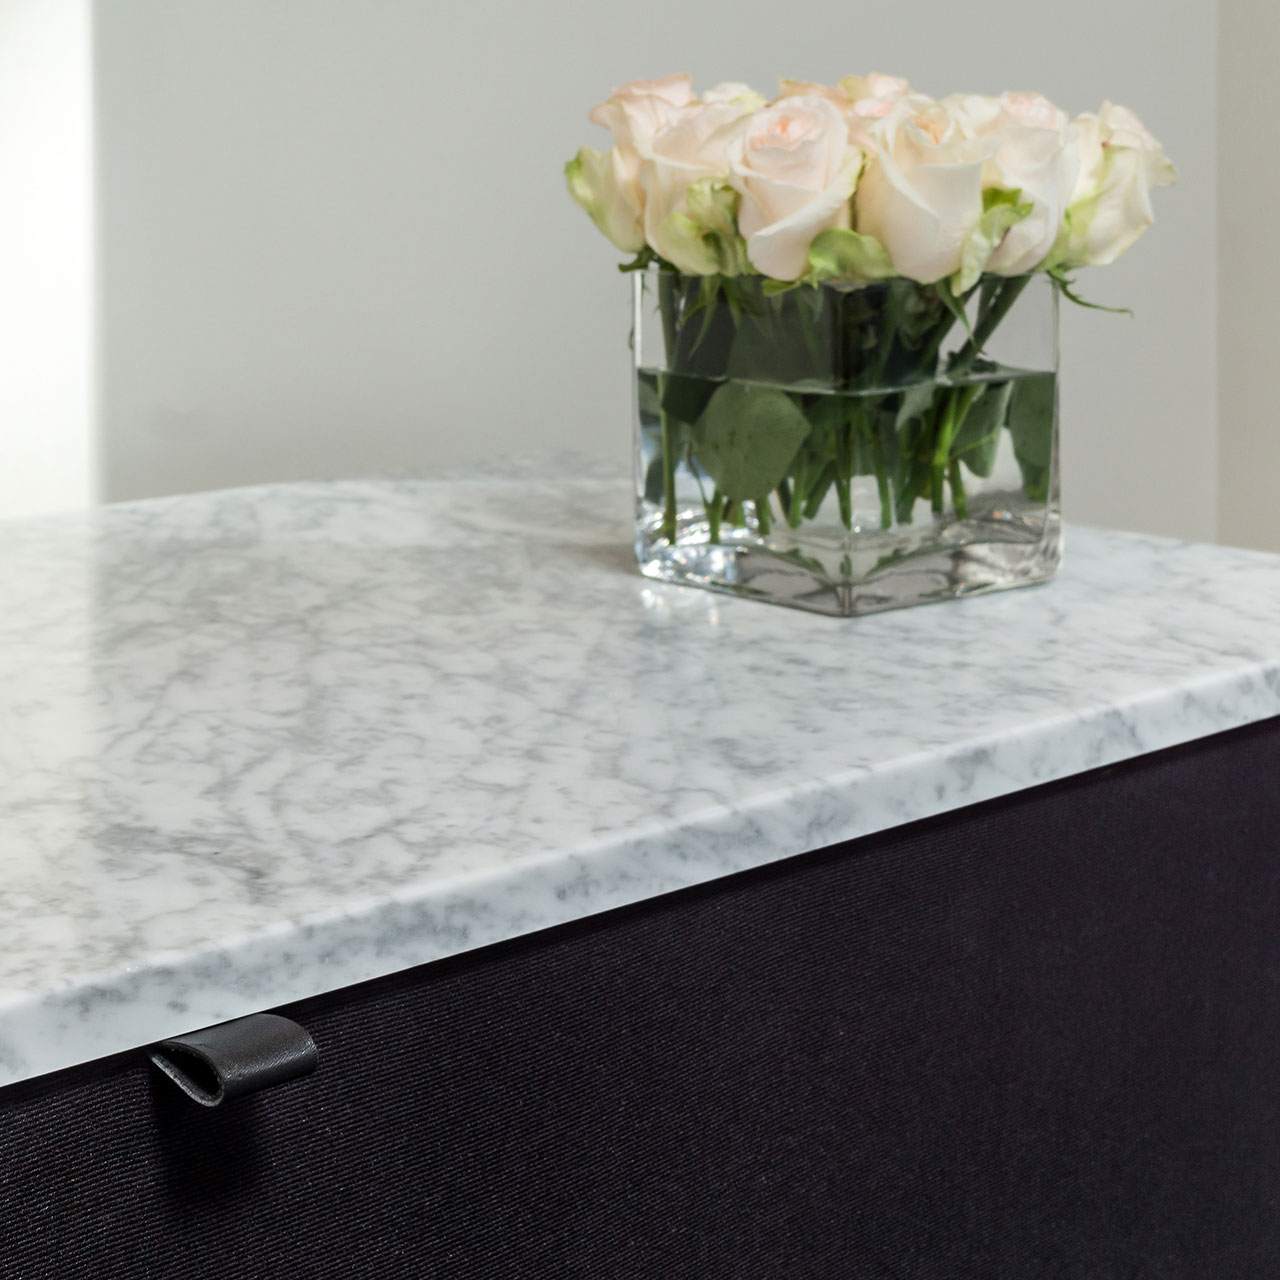 Cabinetry features Carrera marble and custom leather cabinet pulls.